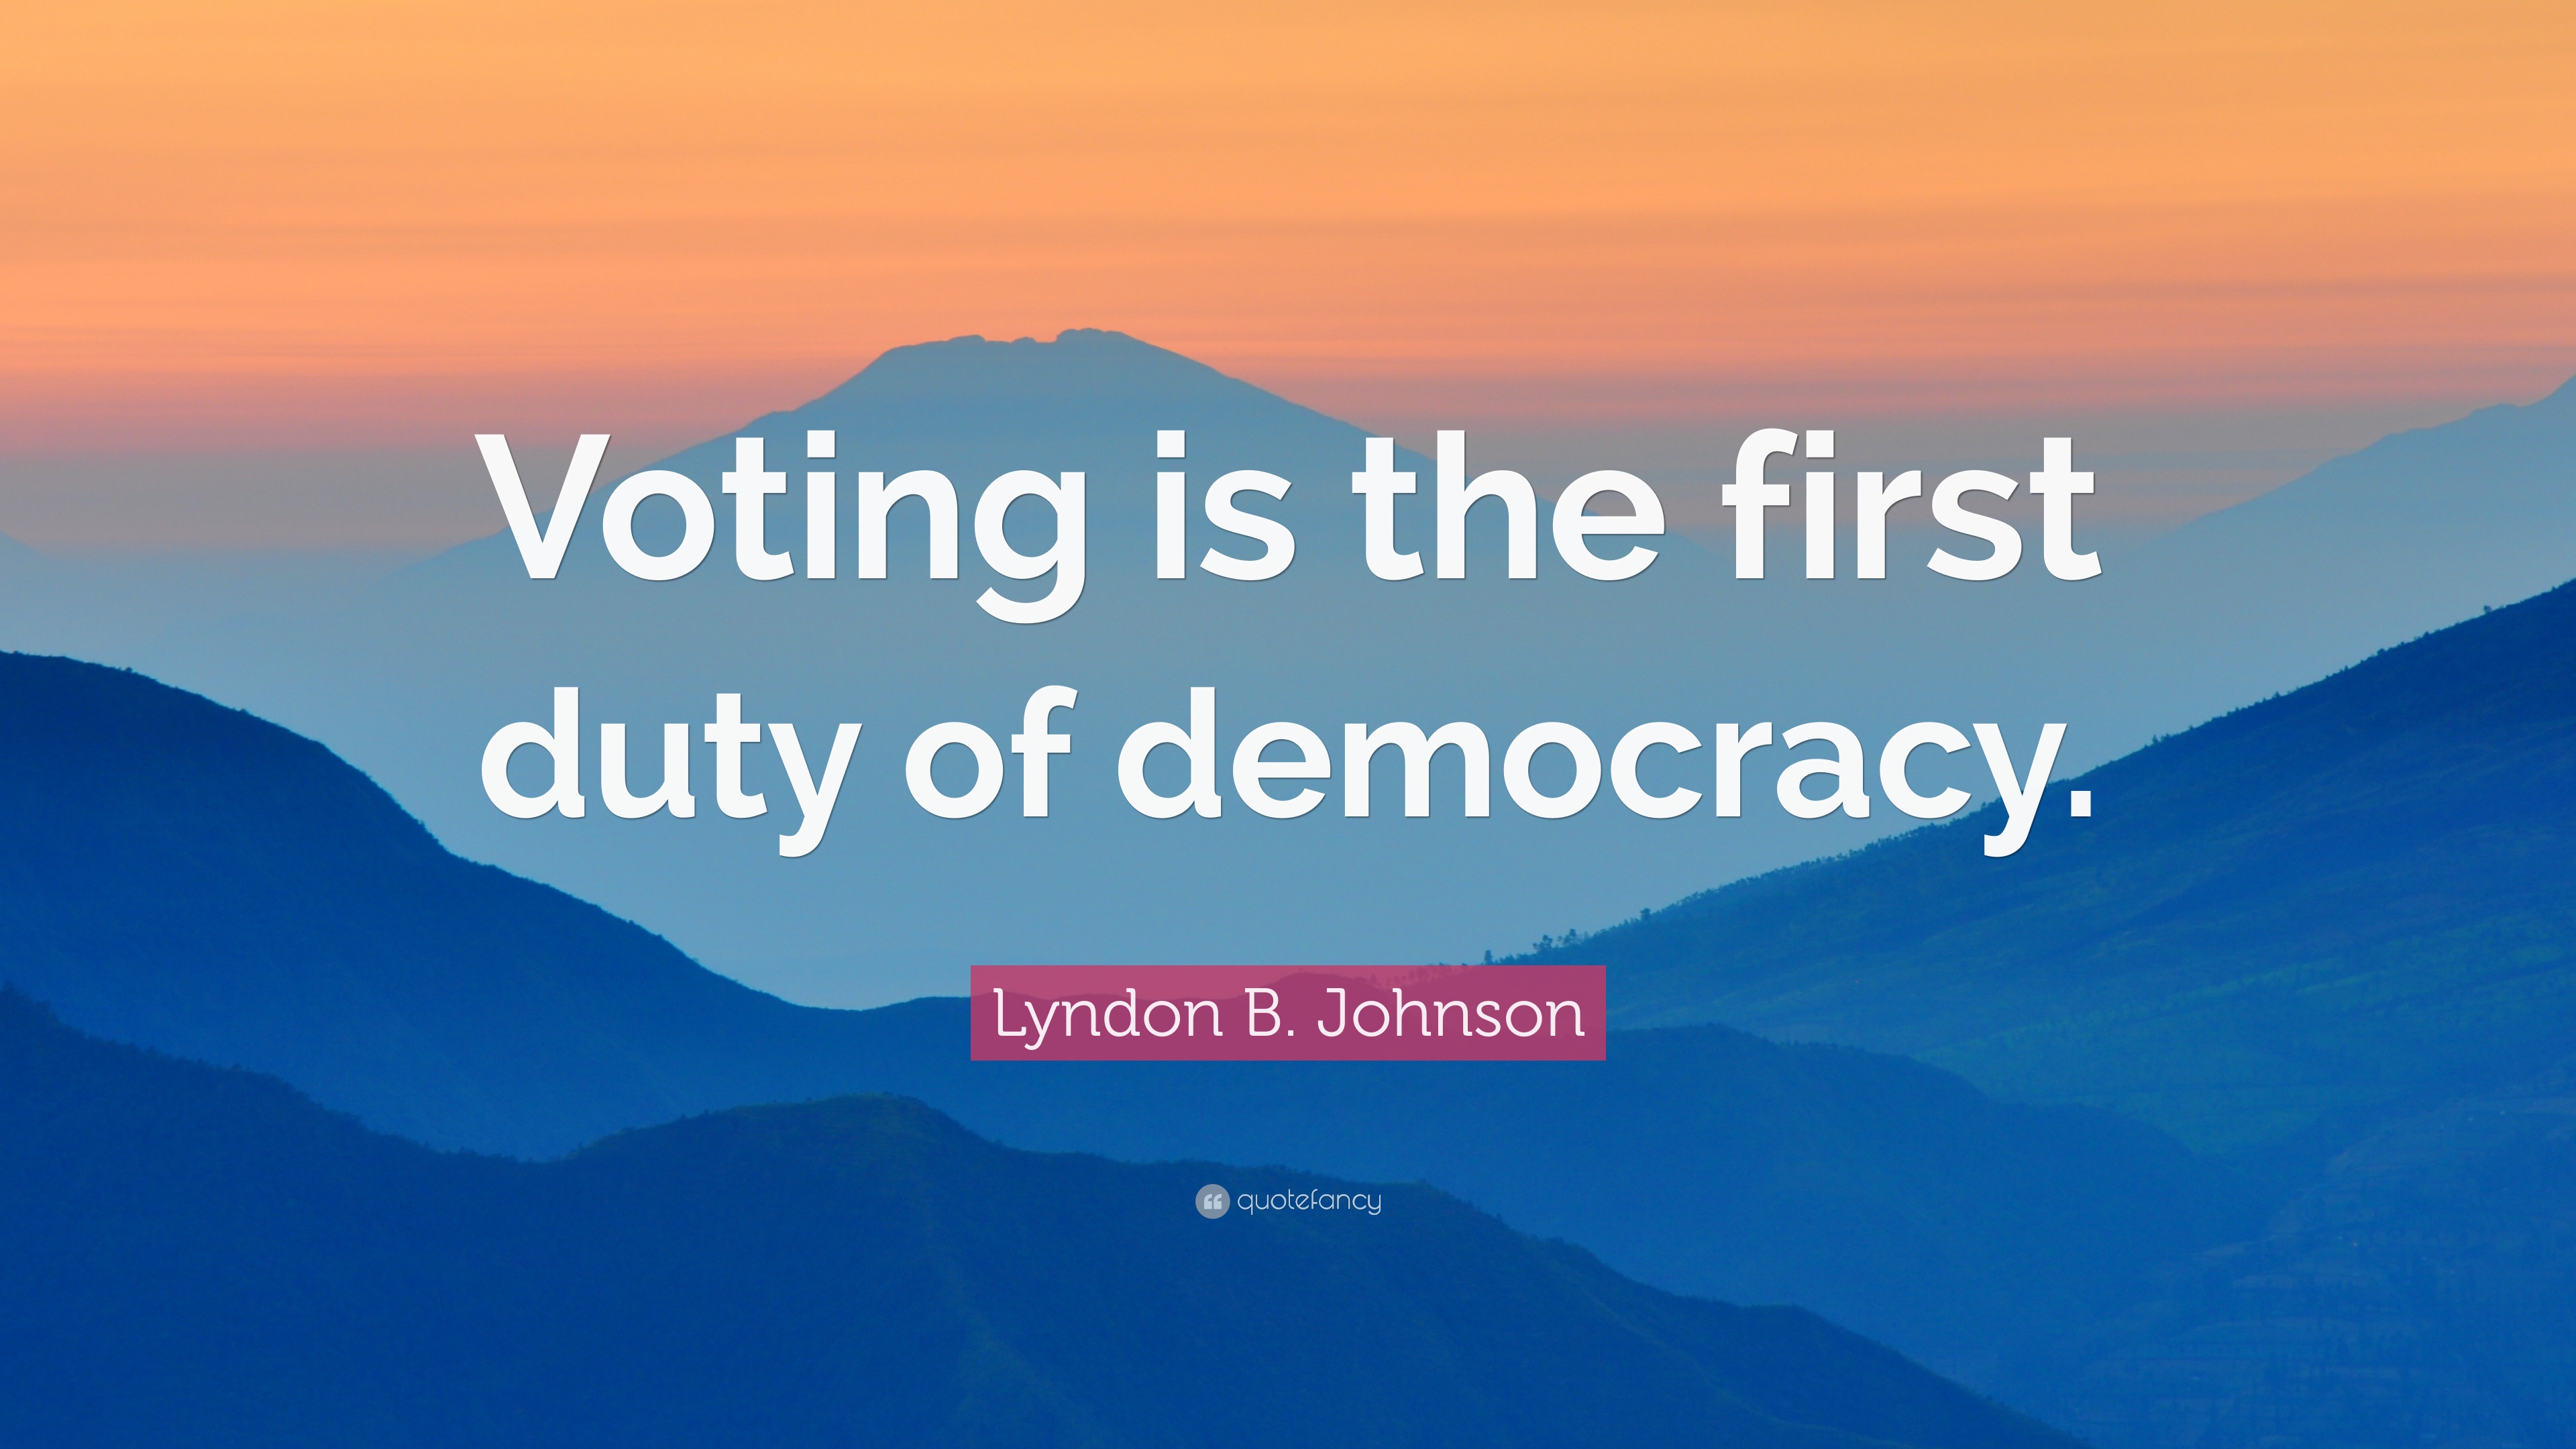 Lyndon B. Johnson Quote: “Voting is the first duty of democracy.” 7